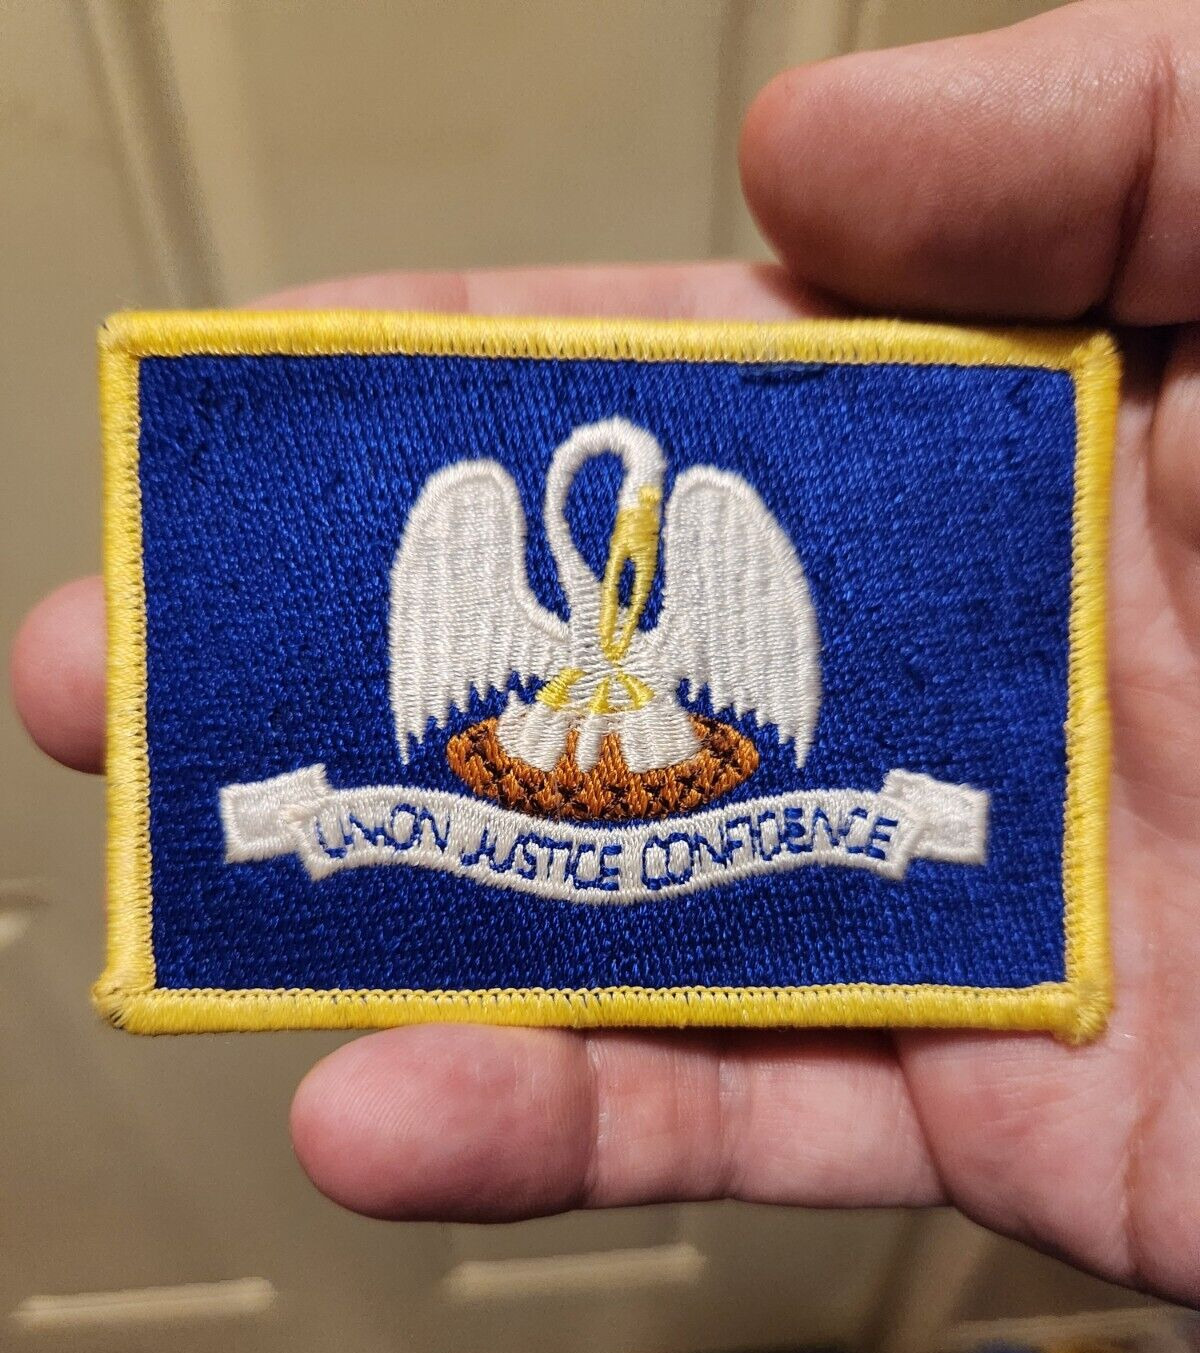 Union Justice Conference Patch